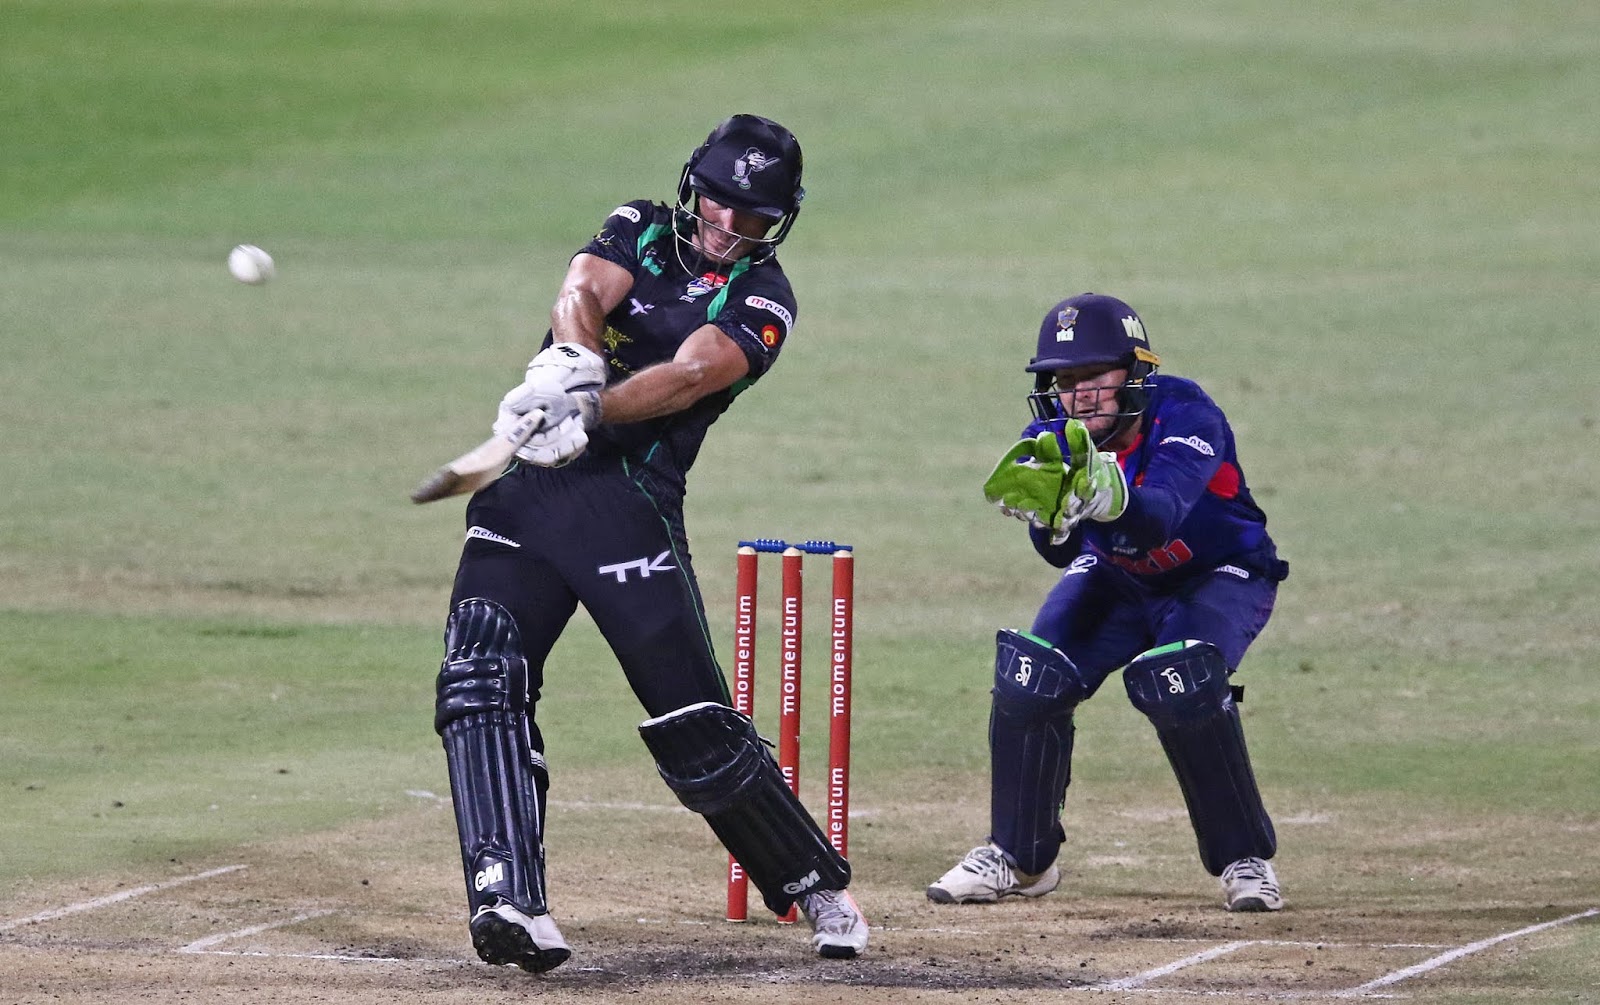 Sarel Erwee - Batting for the Hollywoodbets Dolphins vs VKB Knights in the Momentum One Day Cup